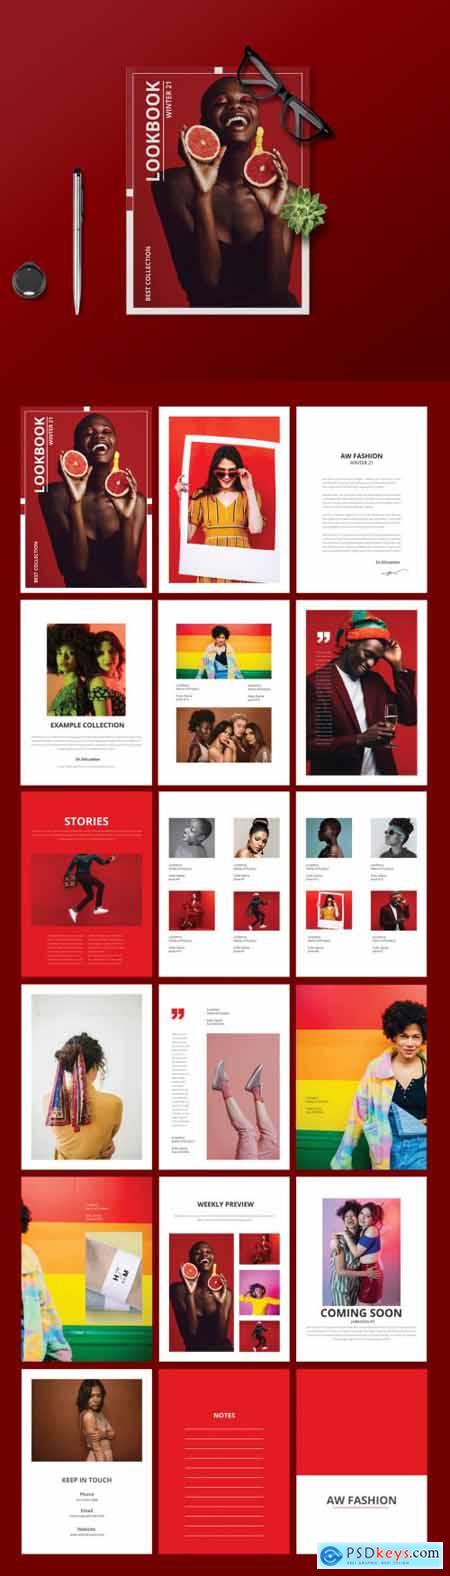 Lookbook Layout with Red Accents 394759109